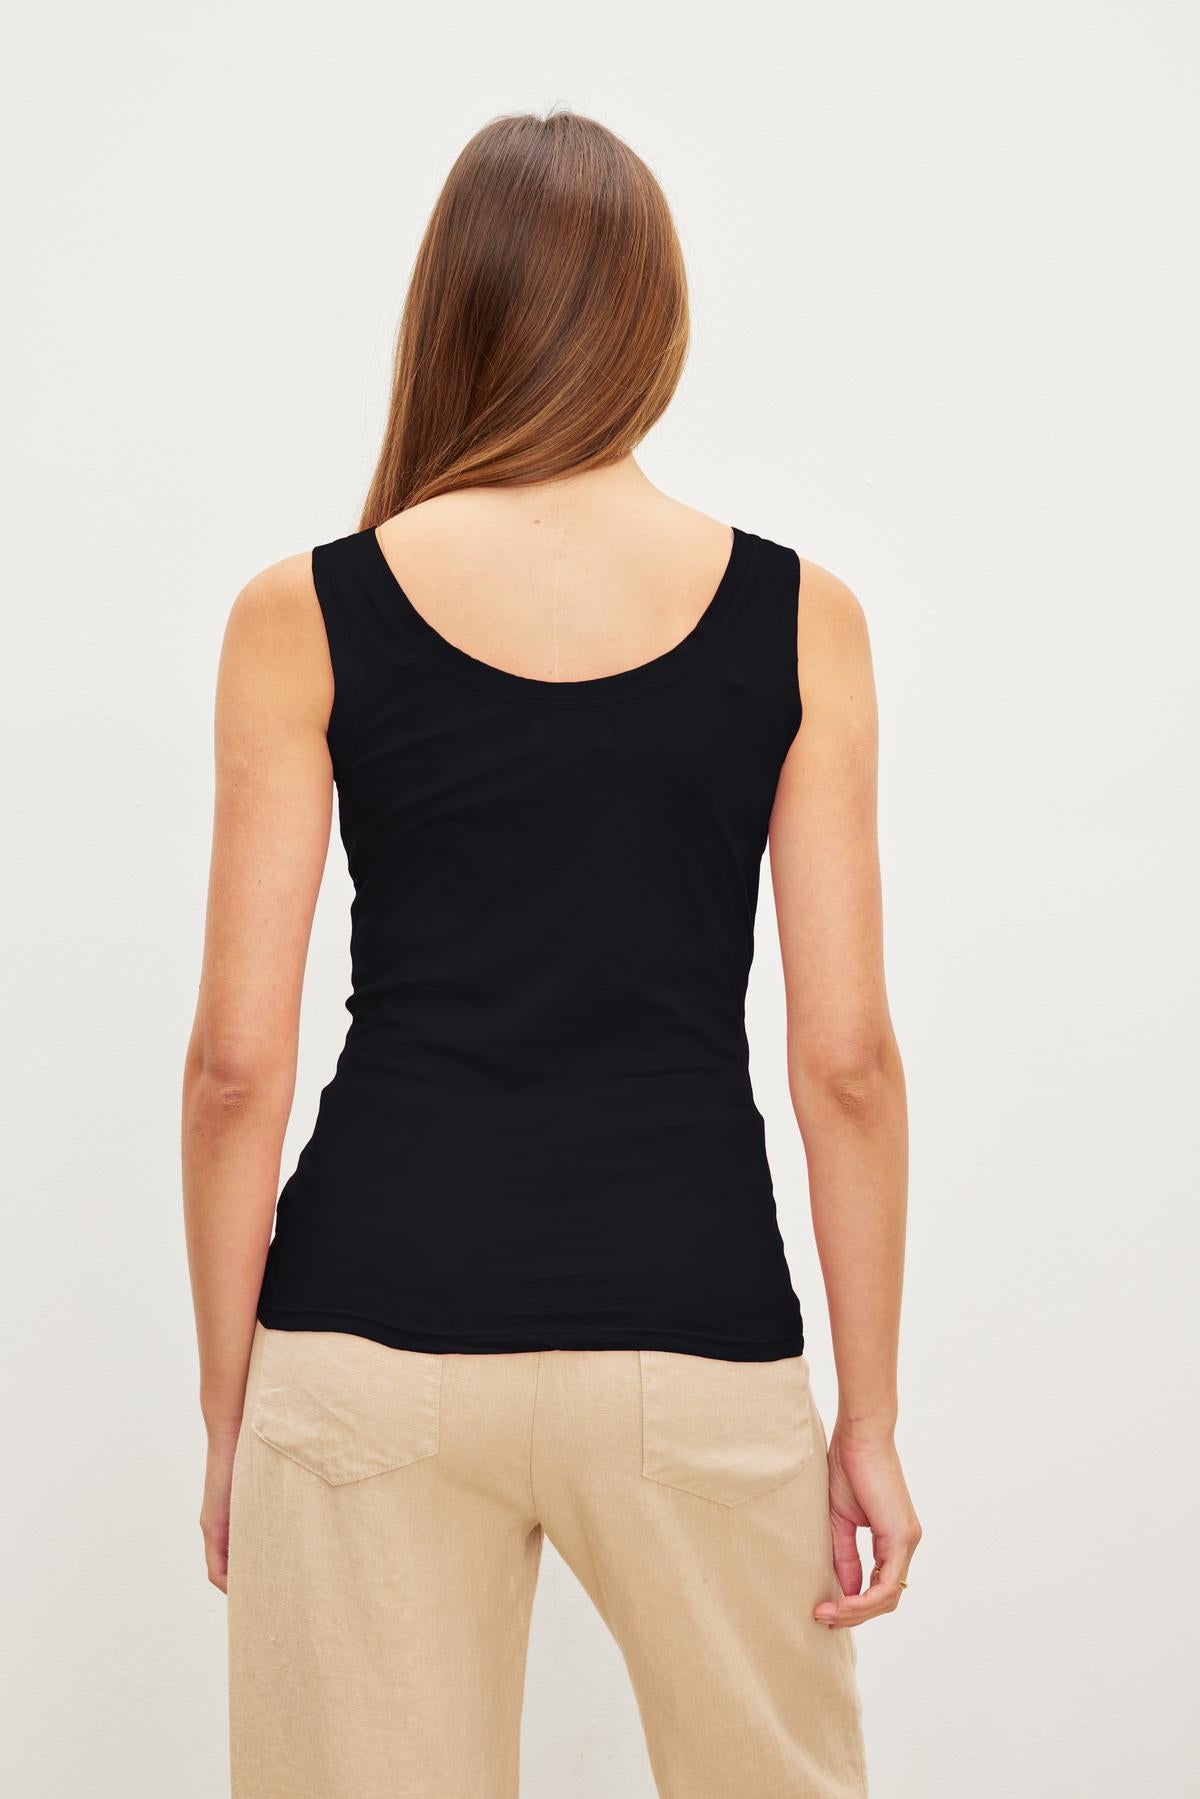 Rear view of a woman with straight brown hair wearing a Velvet by Graham & Spencer Mossy Gauzy Whisper Fitted Tank and beige pants, standing against a white backdrop.-36454076612801